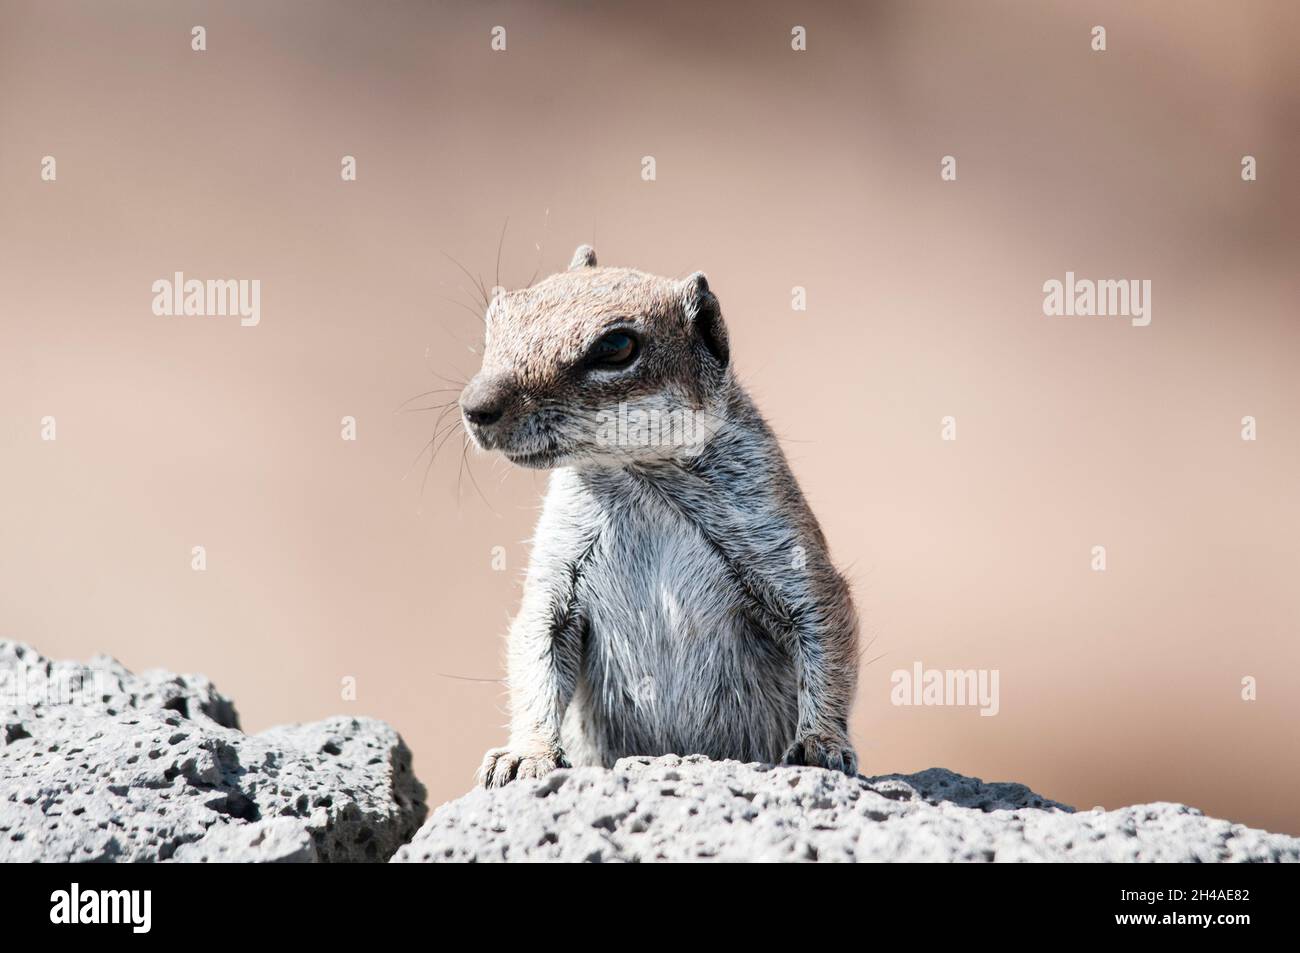 Moorish squirrel looking for something to eat Stock Photo